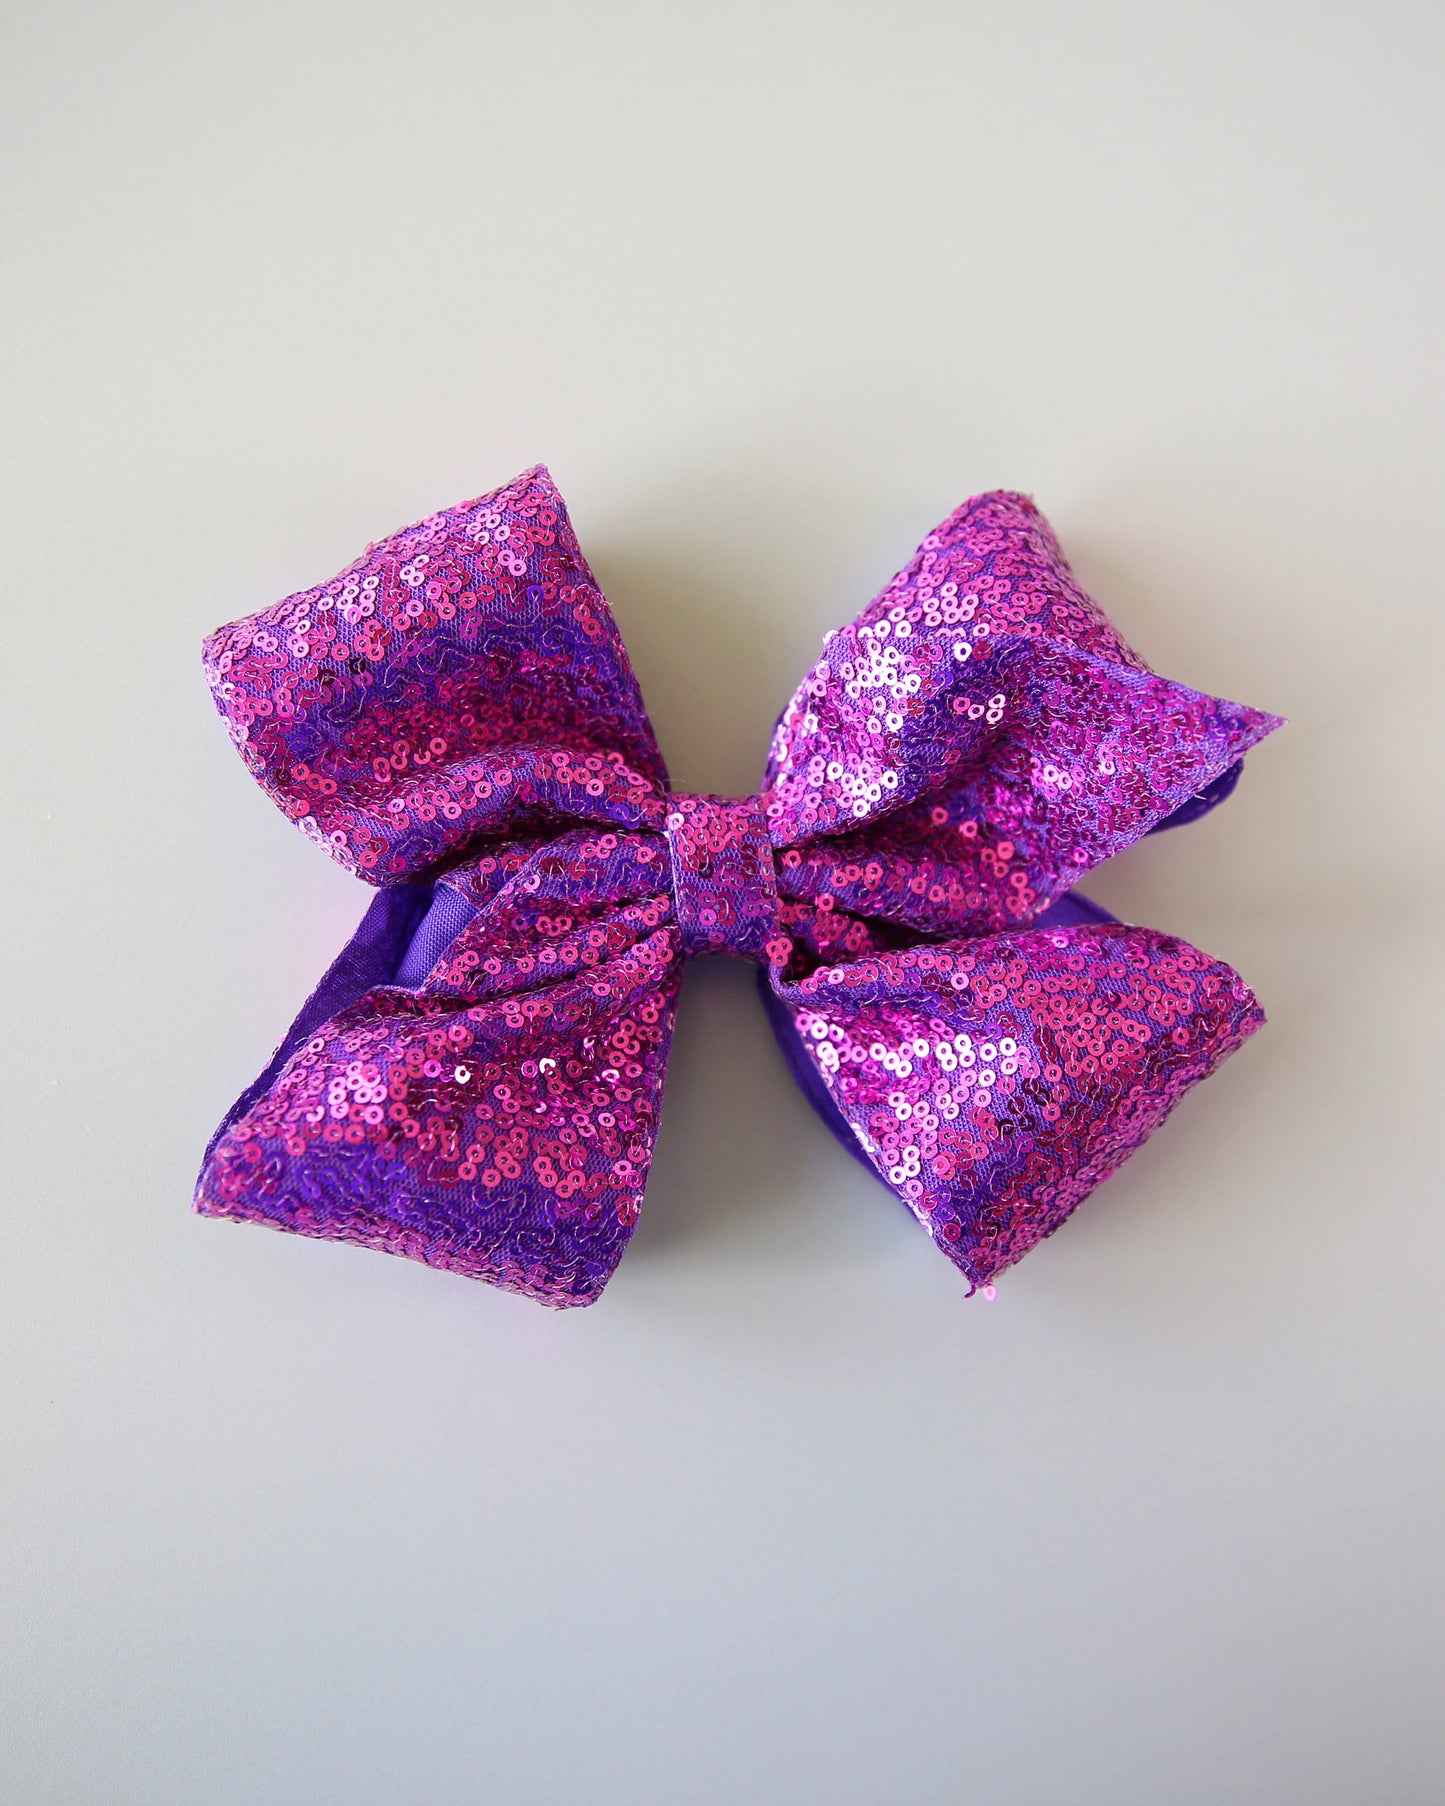 Large Sequin Purple Bow Clip - Large Sequin Bow Clip, Purple Bow, Purple Dance Bow Clip - Oversized Sequin Cheer Bow, Girls Gift, Cheer, bow